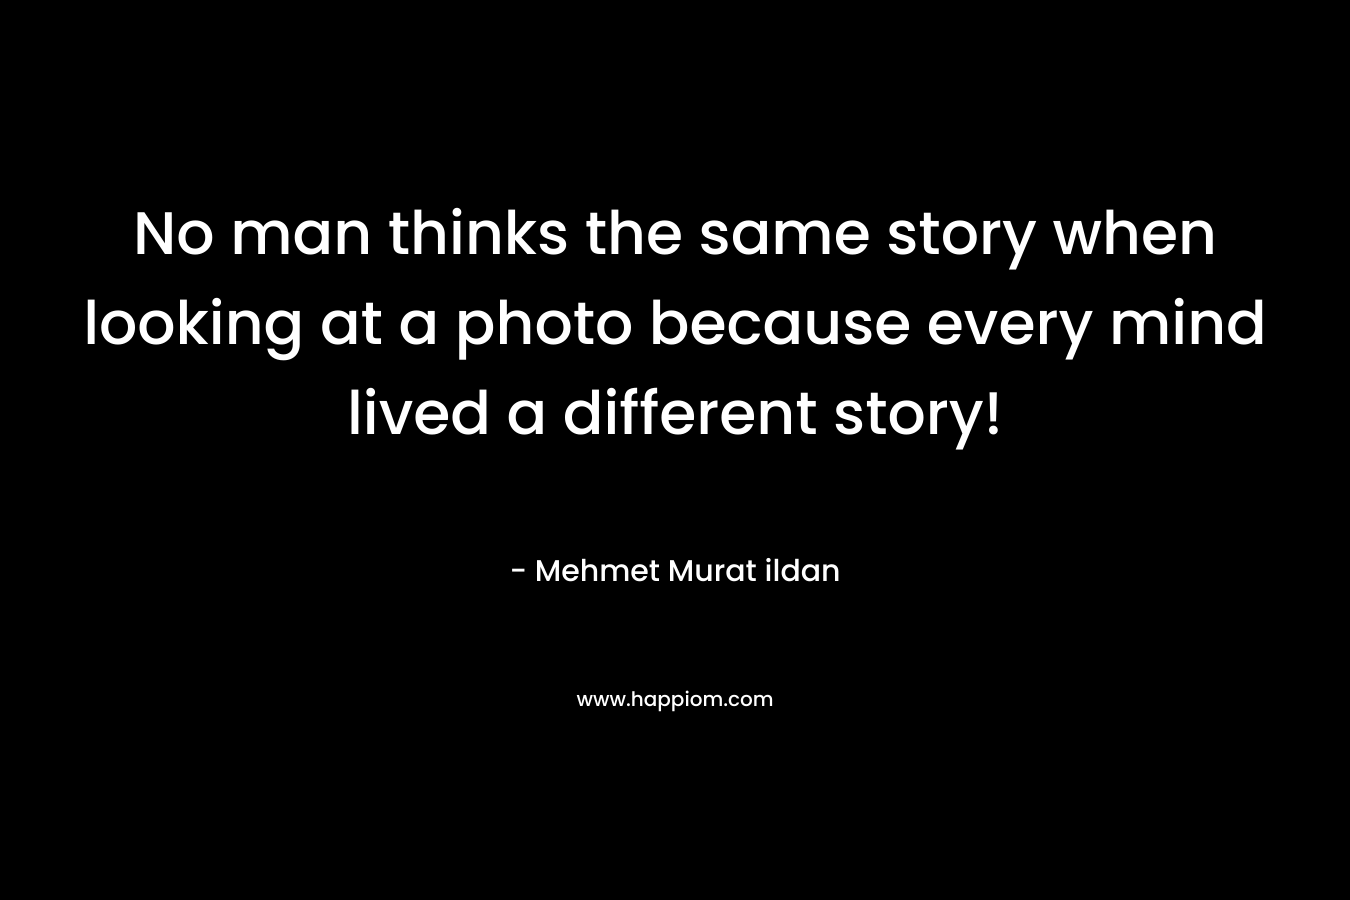 No man thinks the same story when looking at a photo because every mind lived a different story! – Mehmet Murat ildan